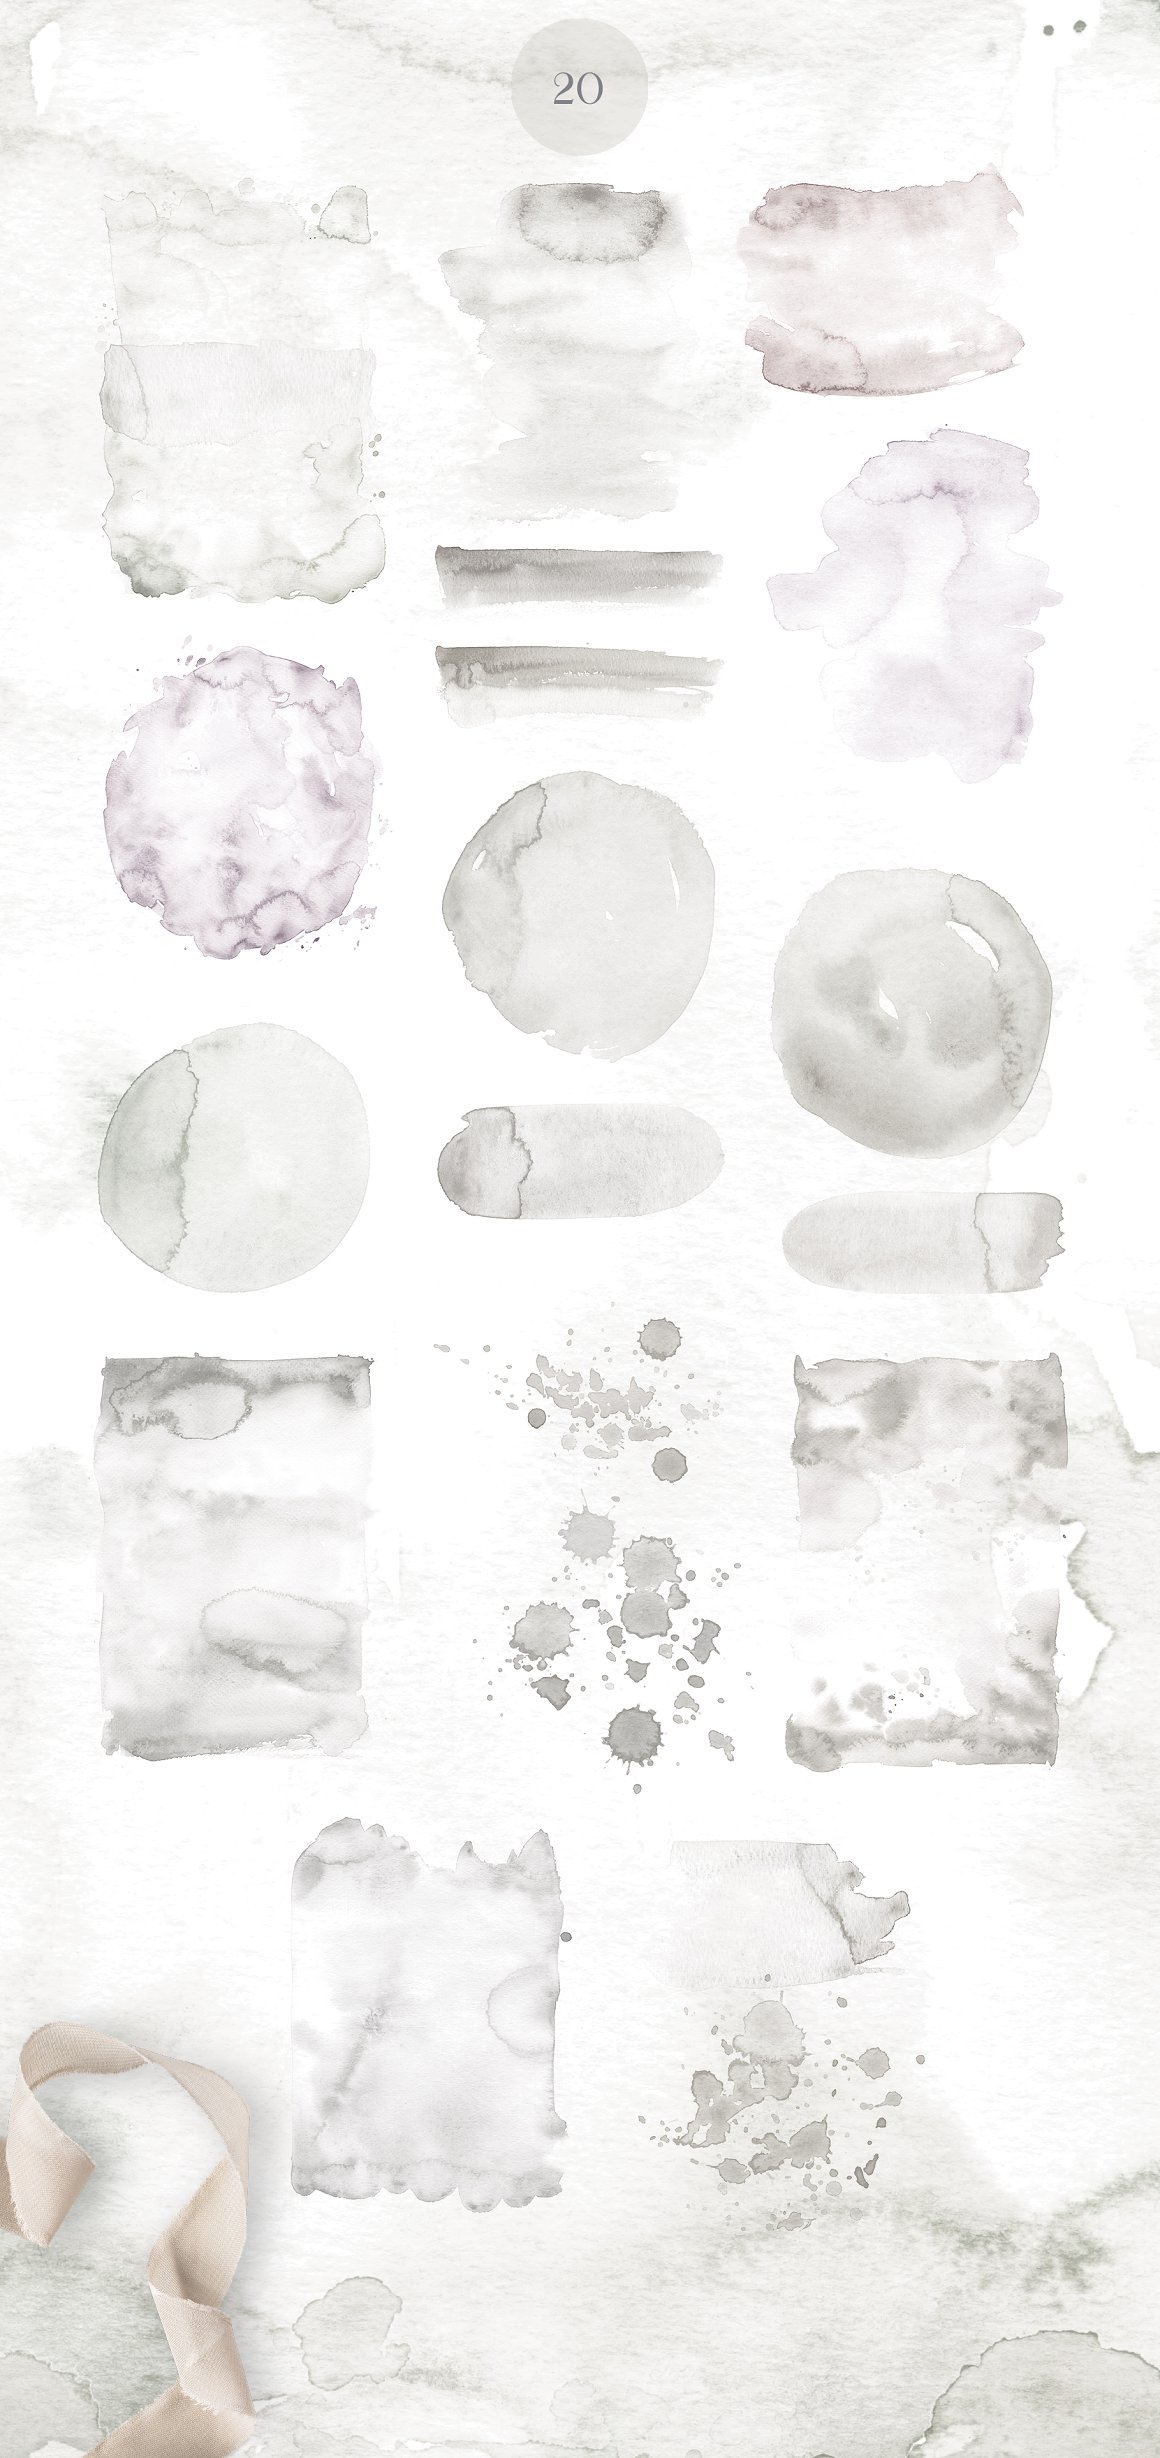 Collection of 20 different watercolor gray shapes.